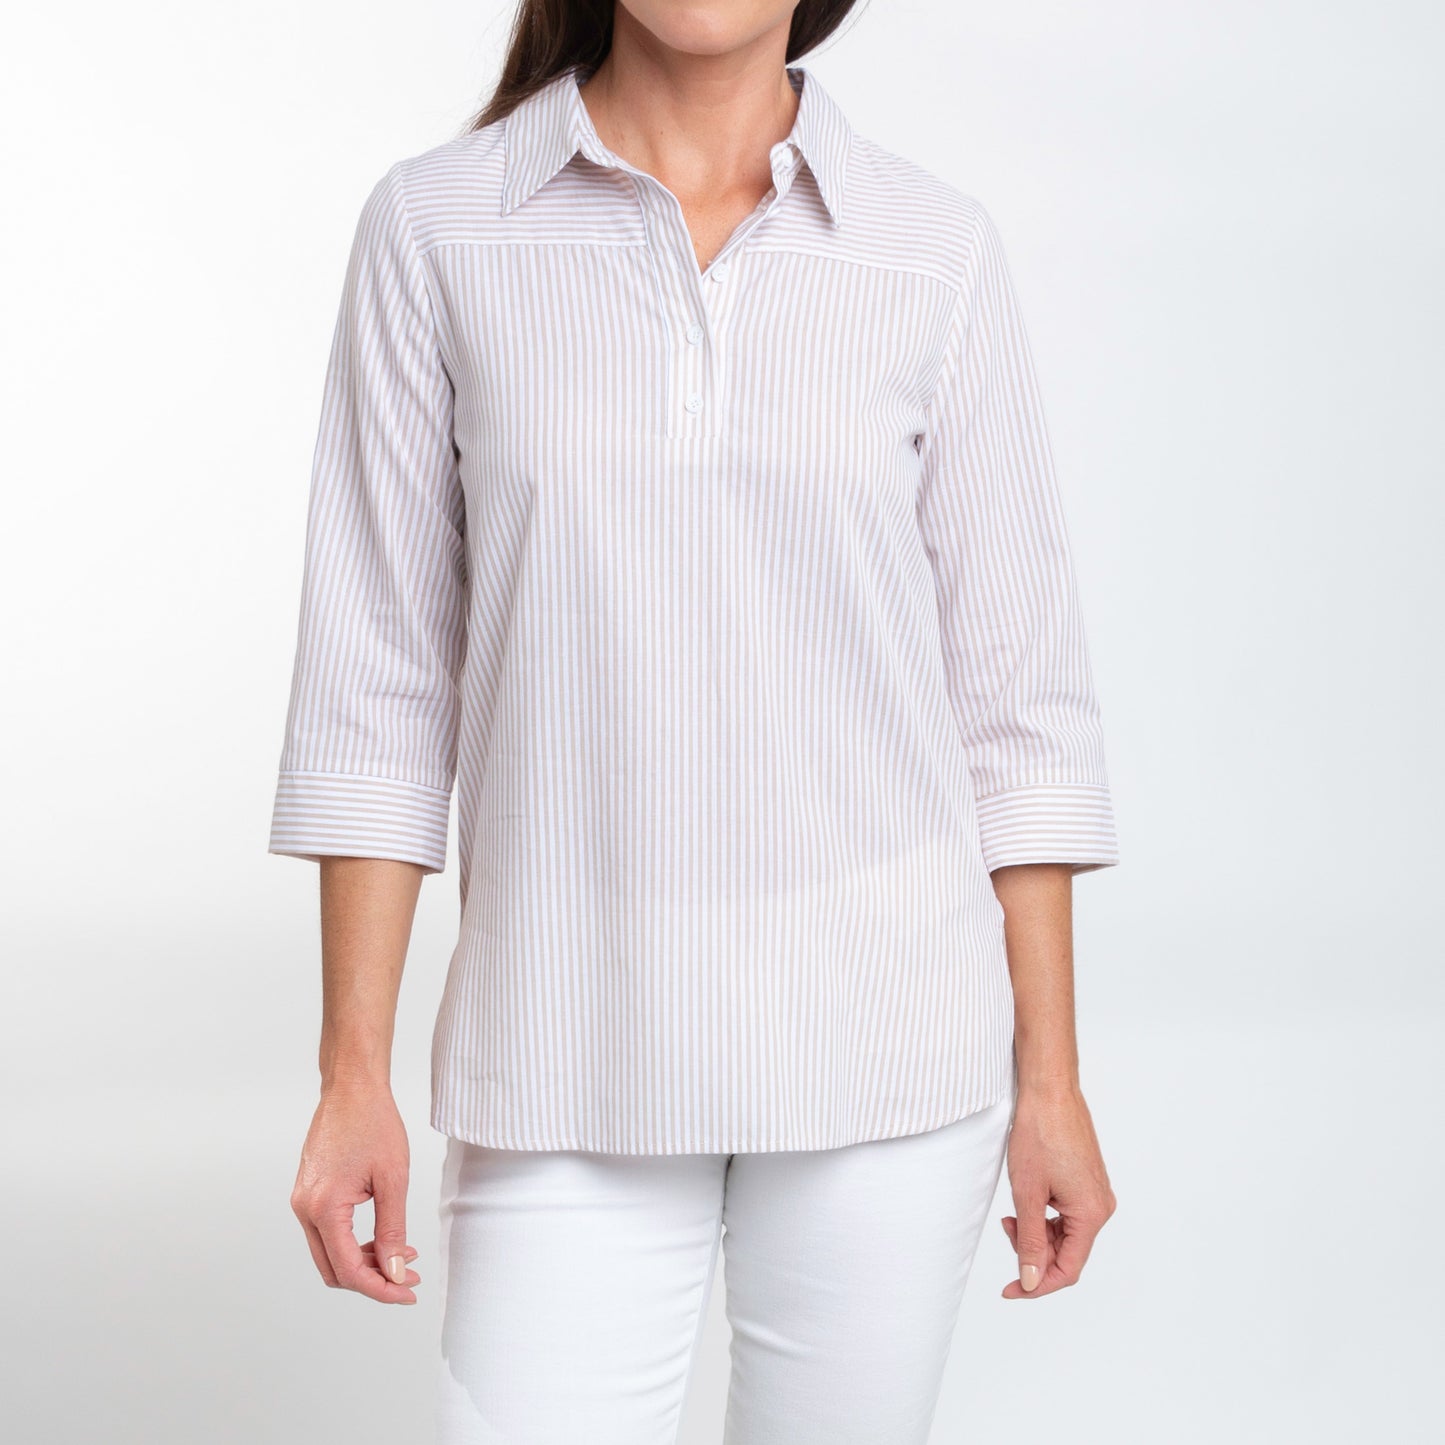 Lakelyn 3/4 Cuff Sleeve Collared Cotton Blouse